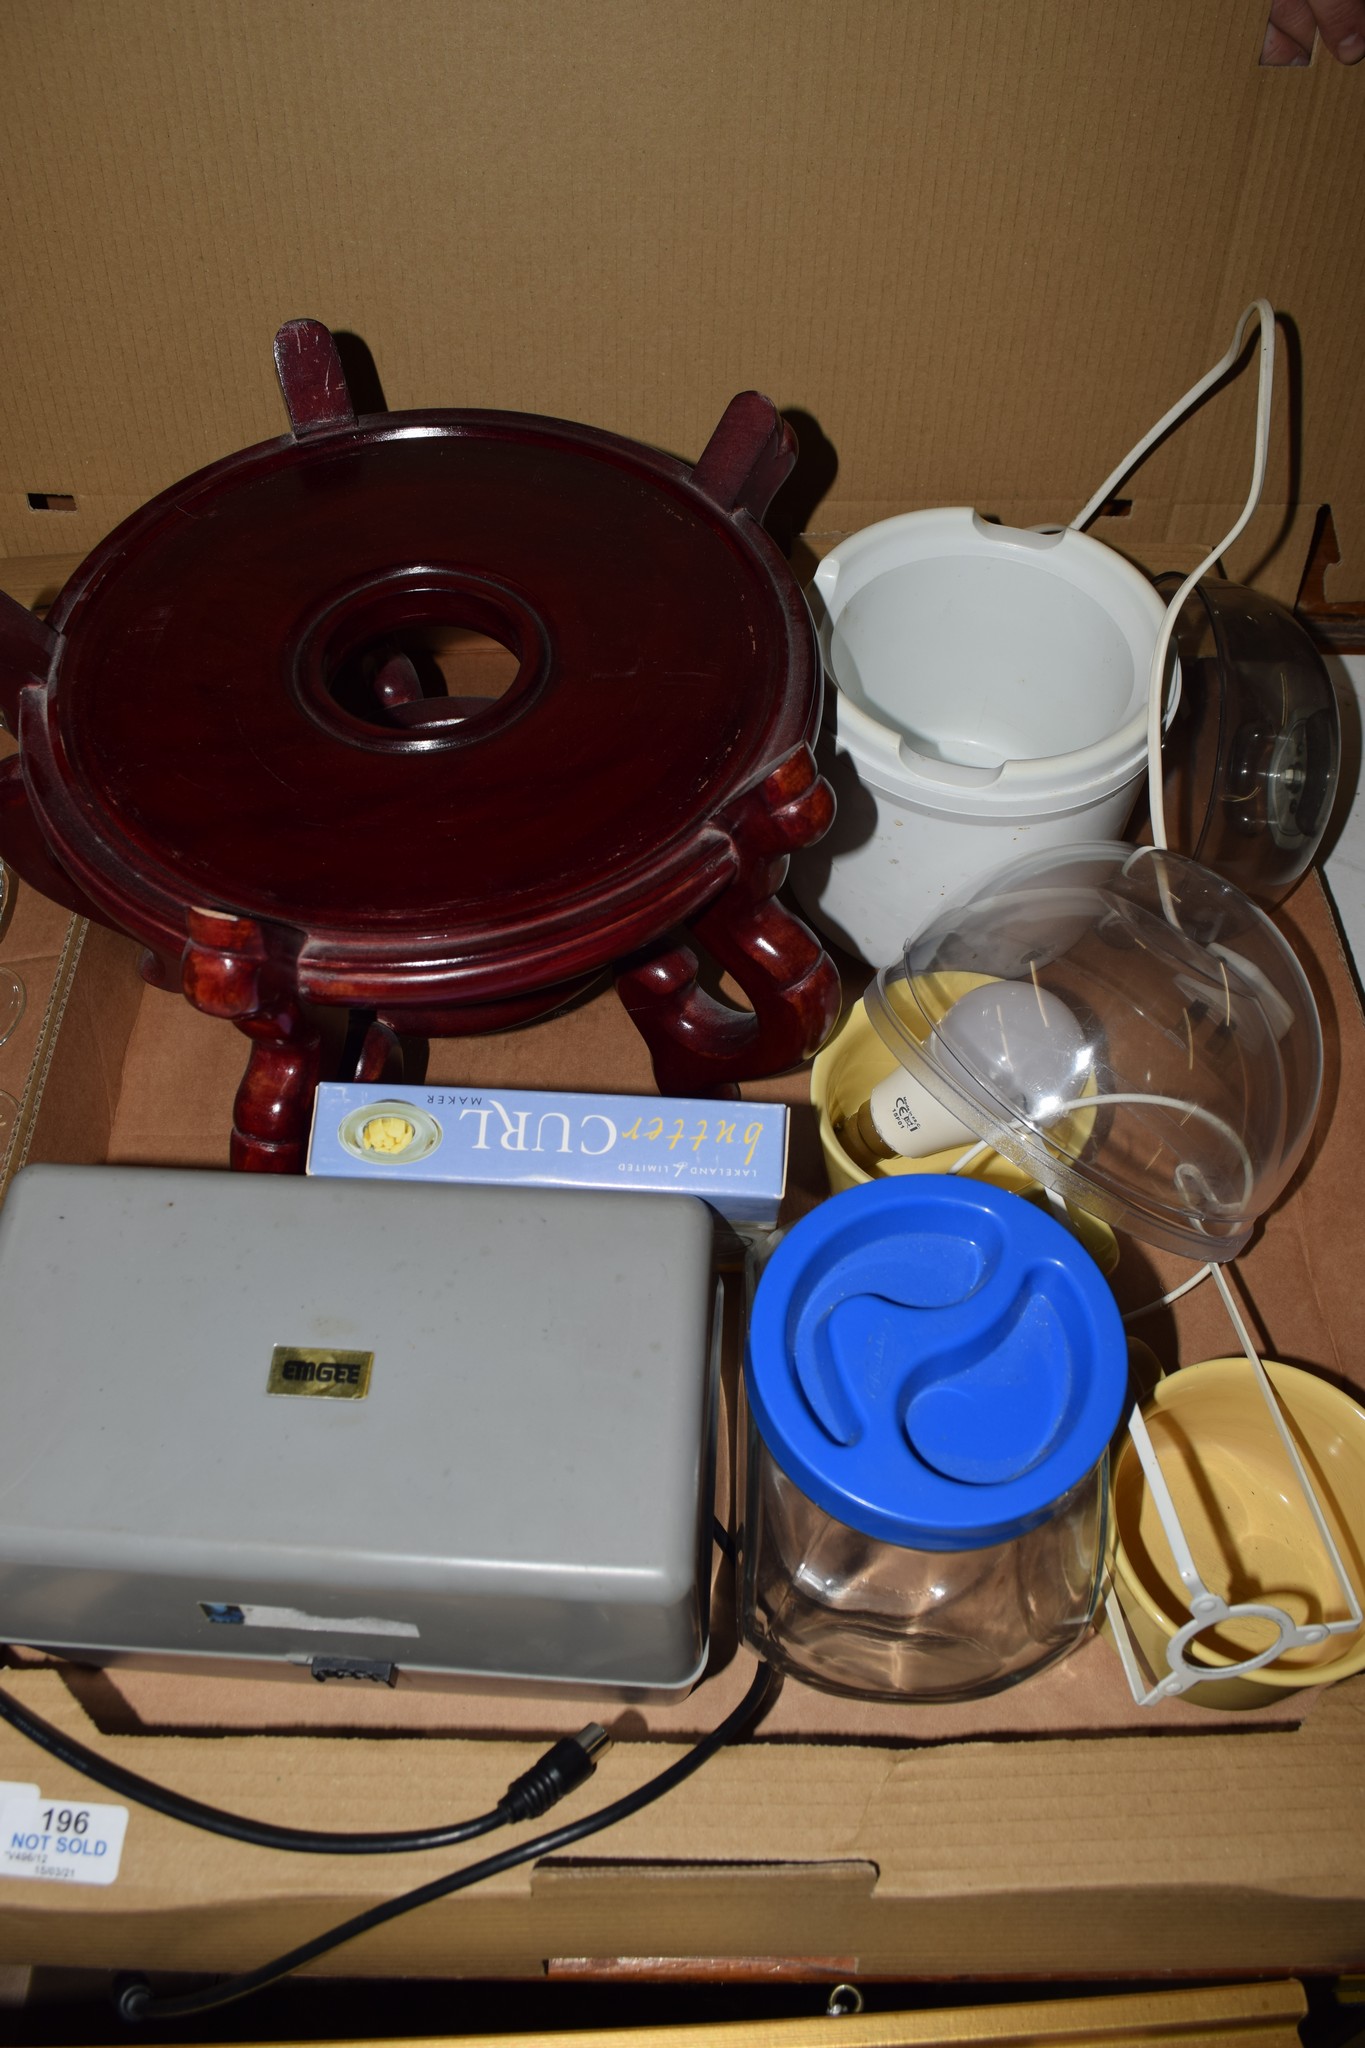 BOX CONTAINING KITCHEN ITEMS